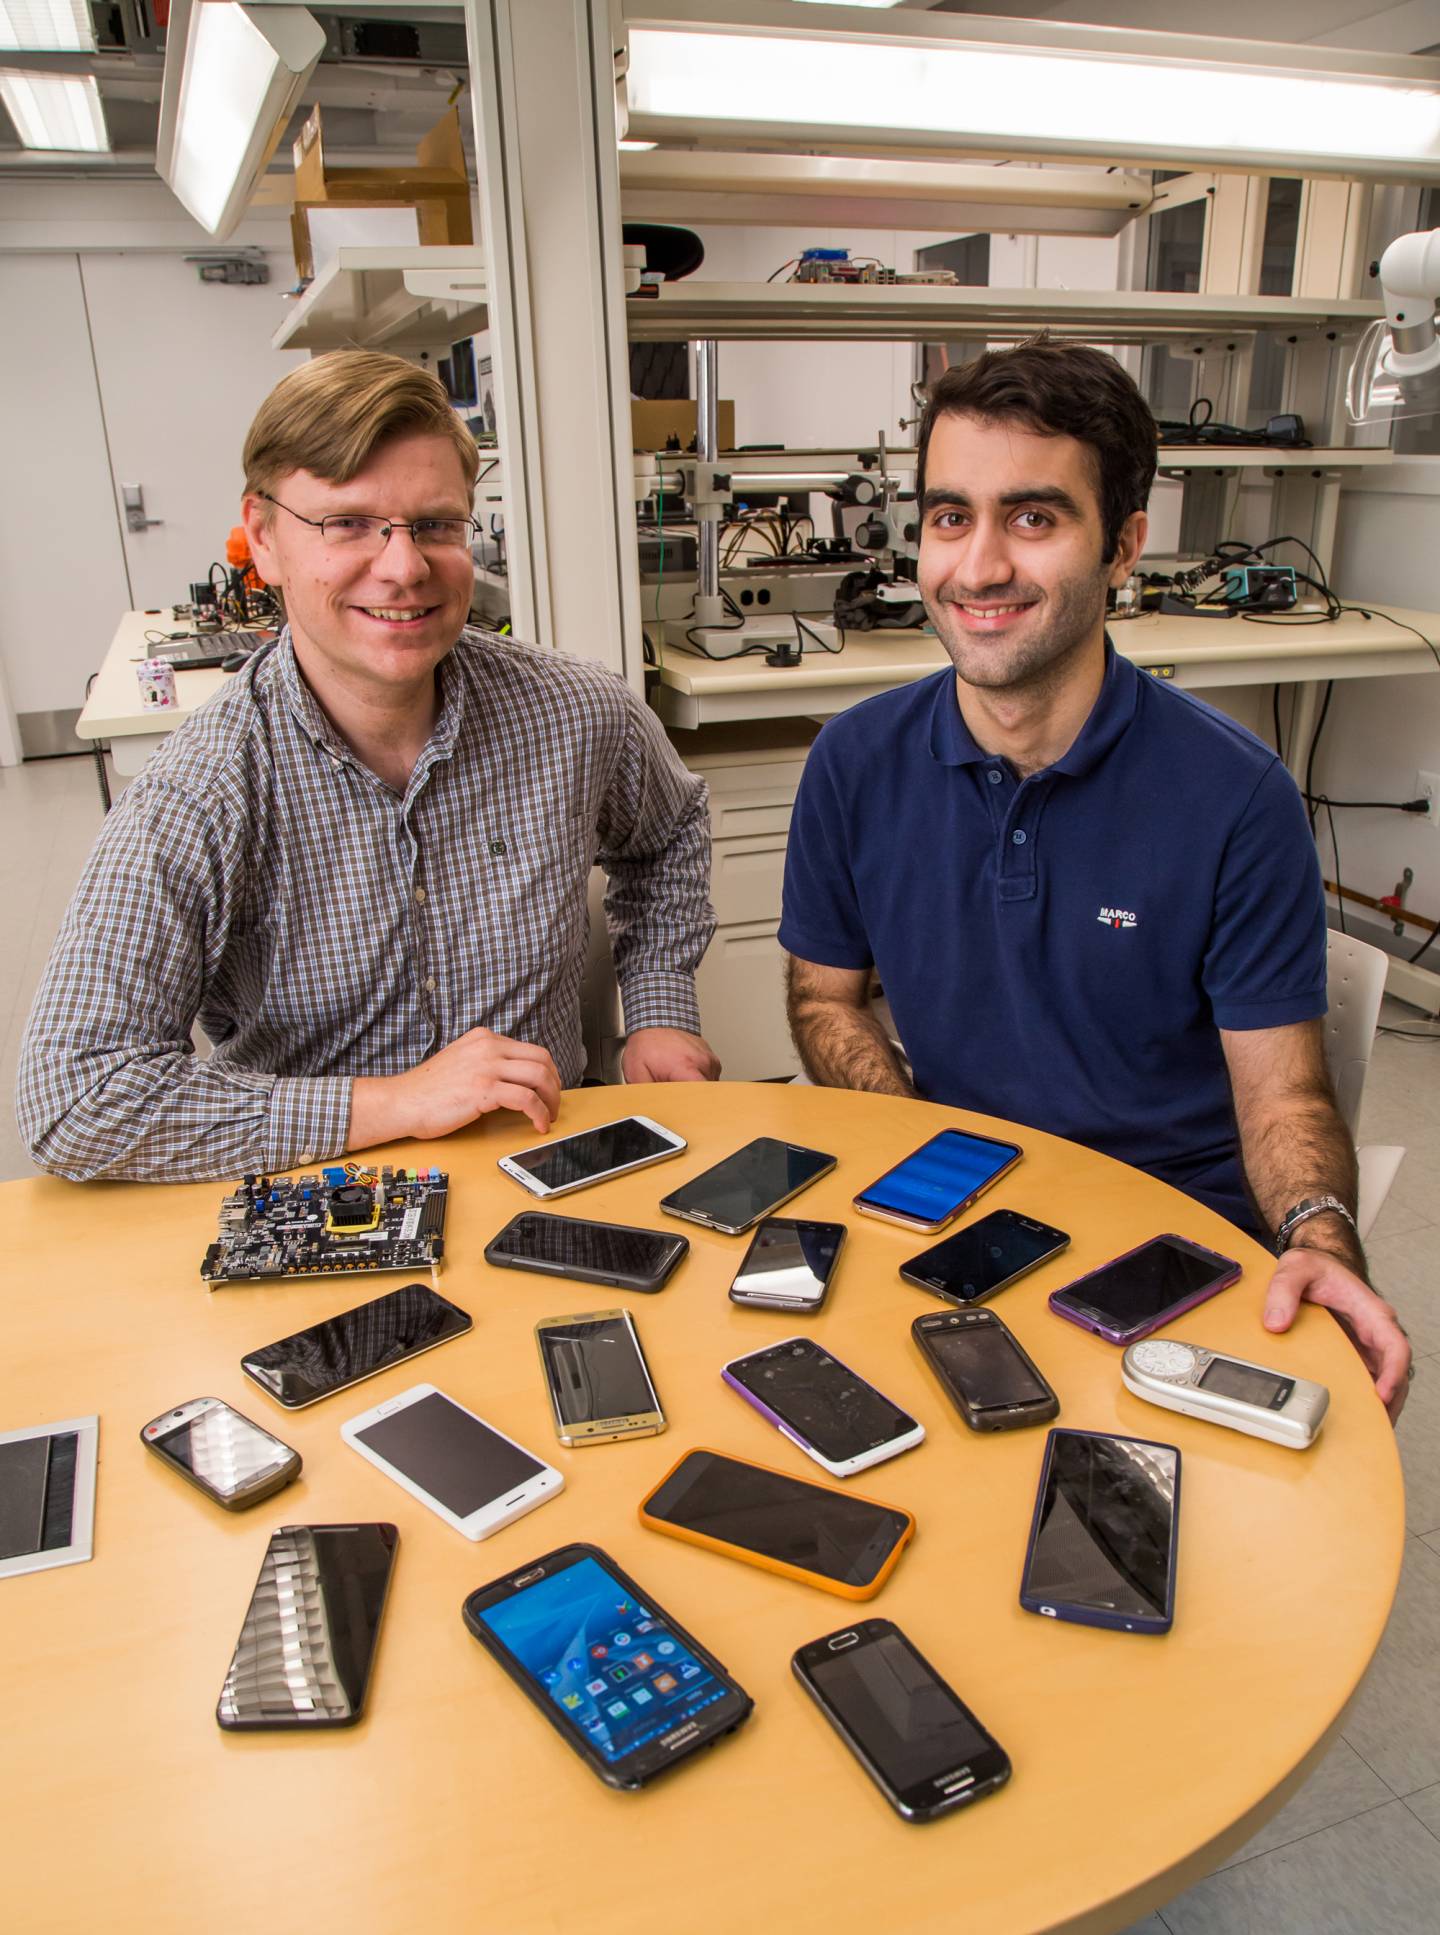 David Wentzlaff and Mohammad Shahrad sit with smart phones on a table